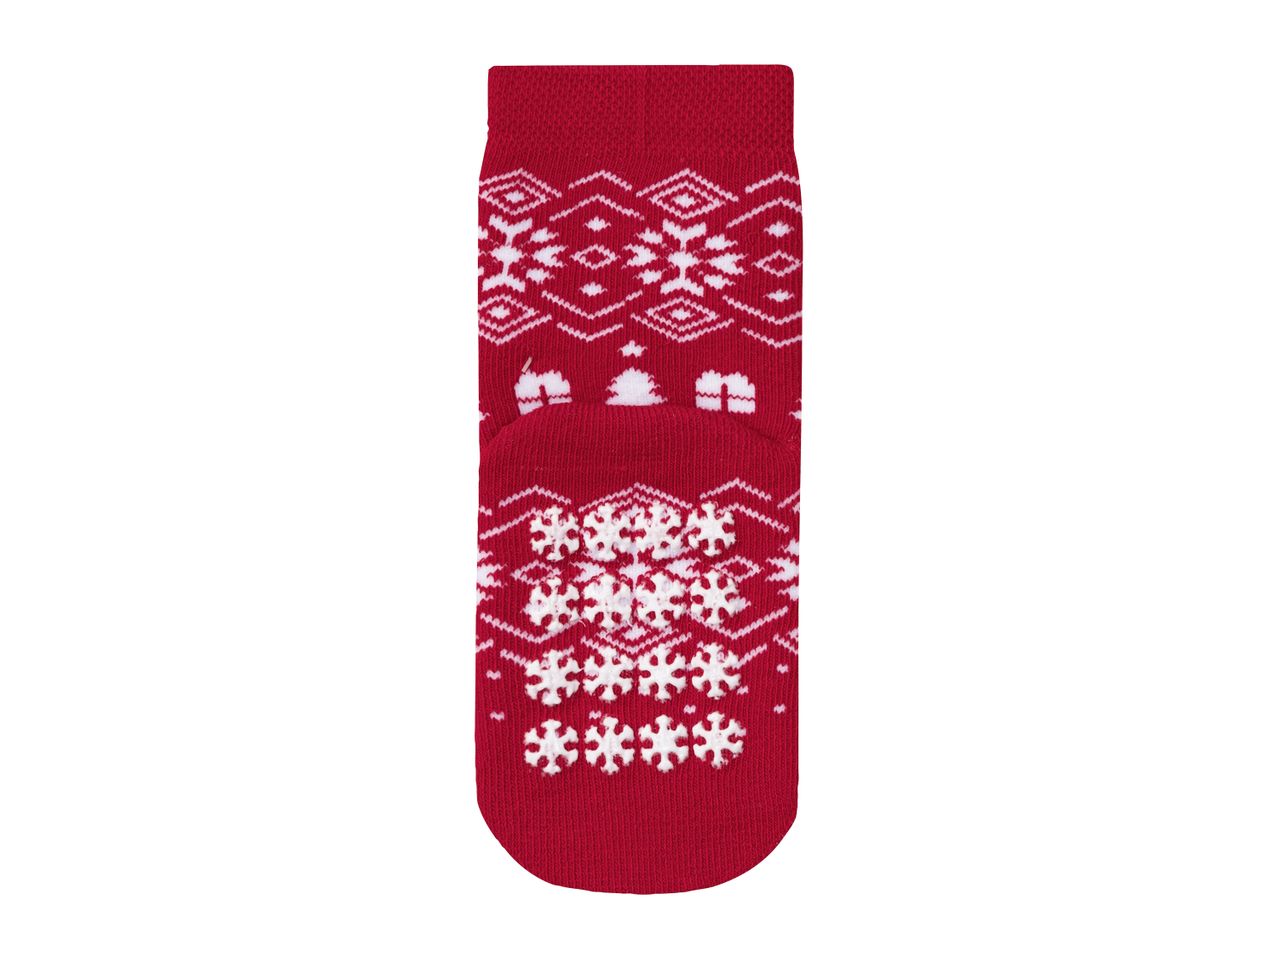 Go to full screen view: Lupilu Younger Kids’ Christmas Thermal Socks - 2 pairs - Image 8